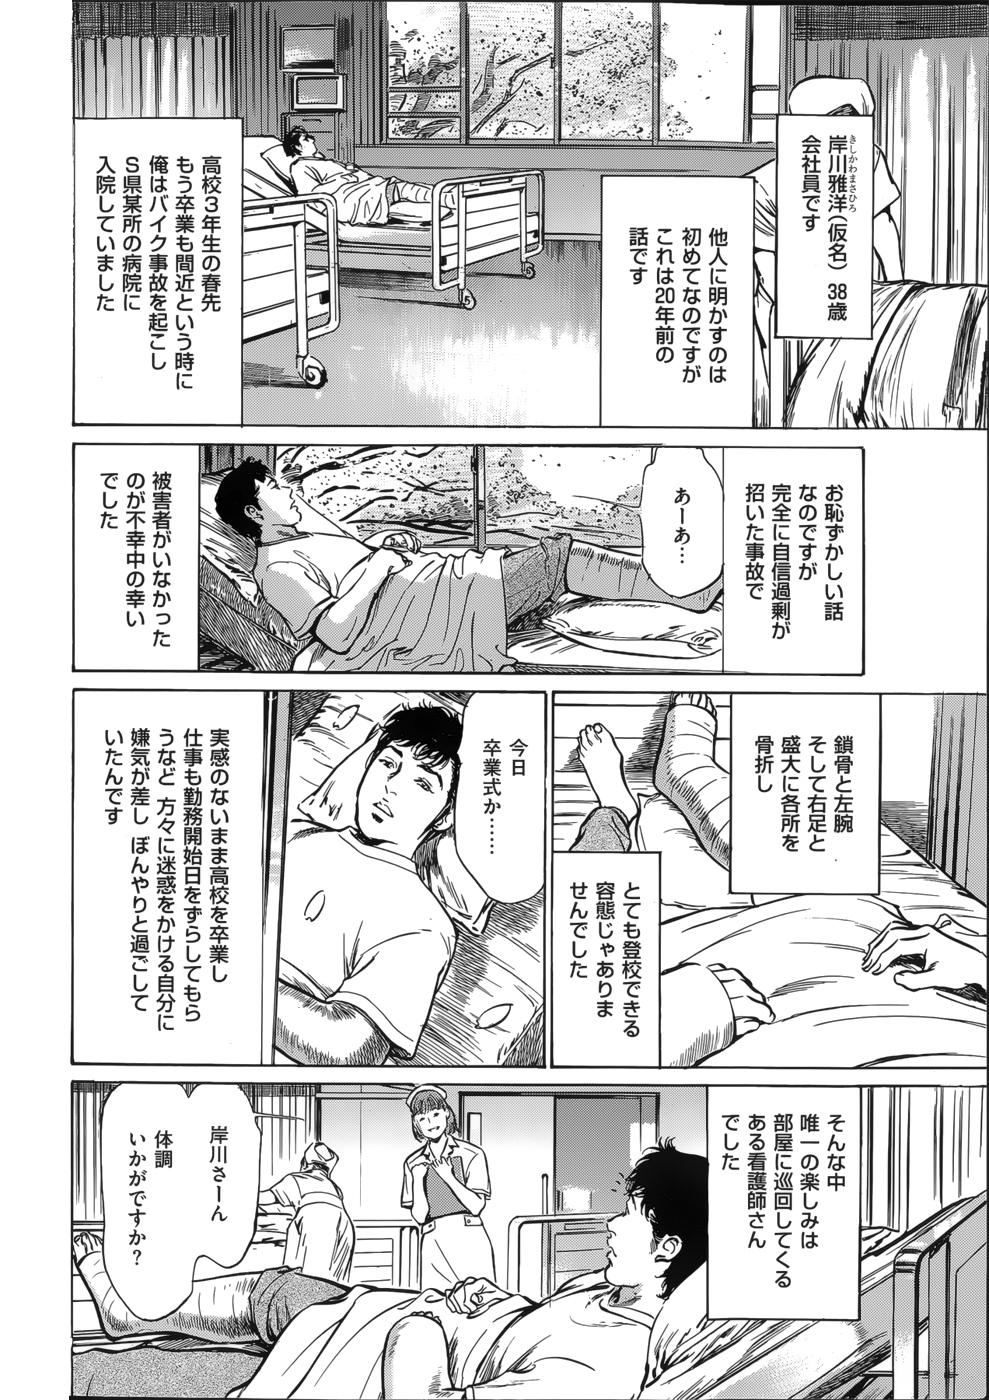 Spain たまらない話 Ch.6-8 Dick - Page 2